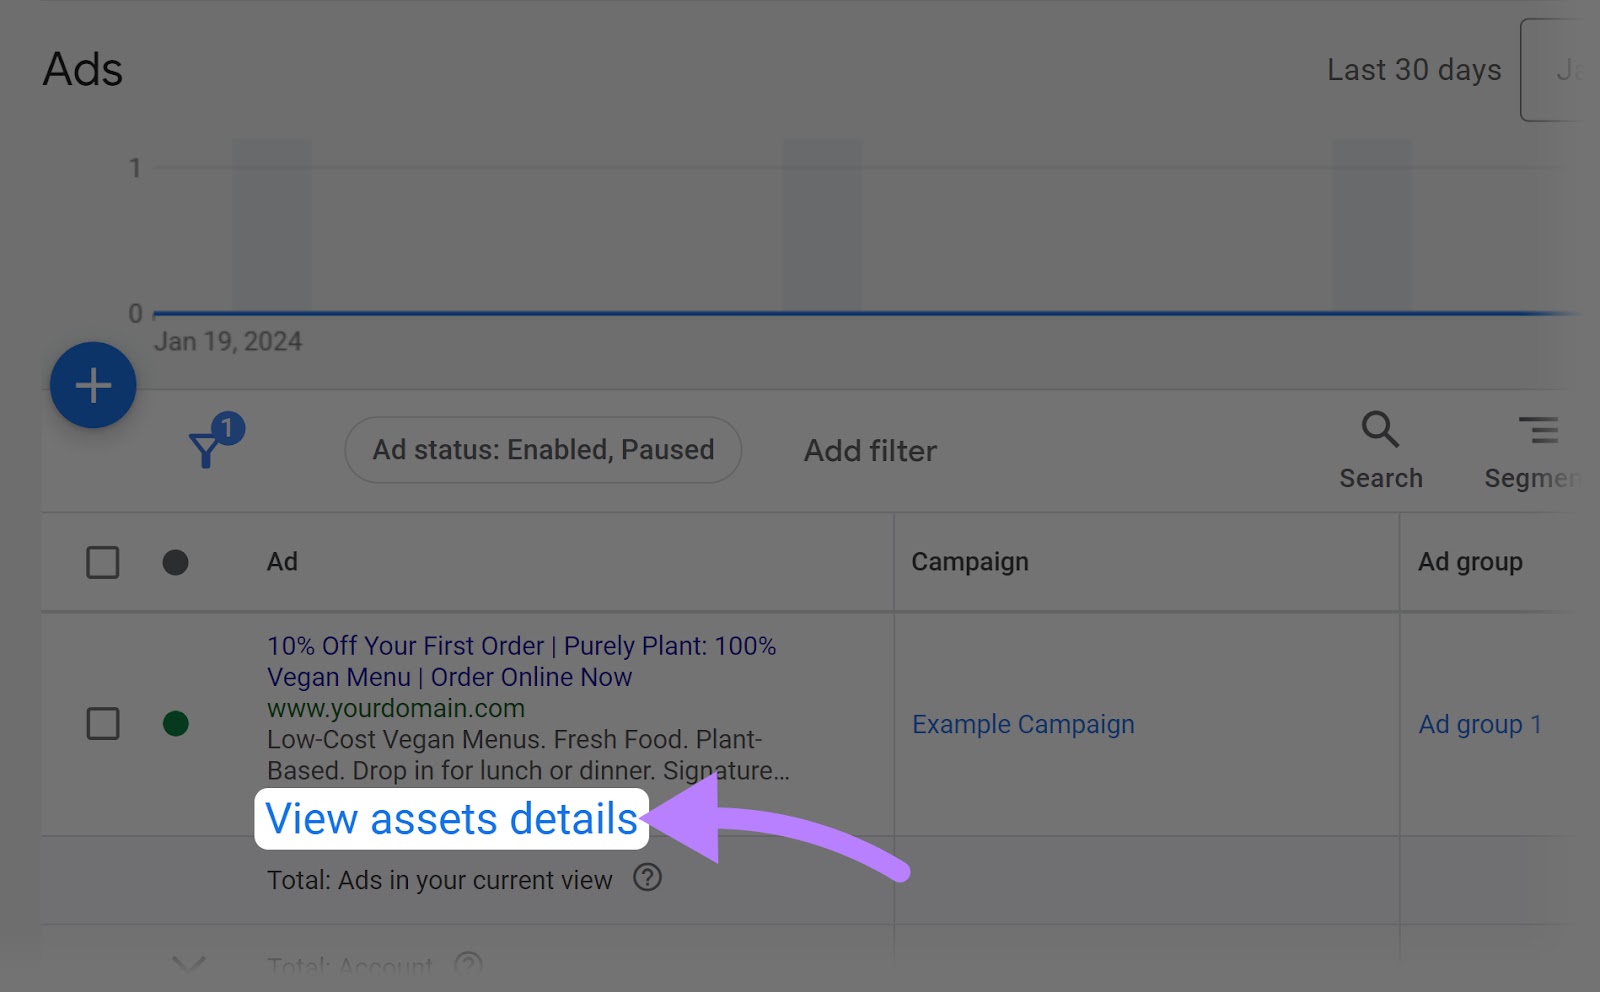 “View assets details” link highlighted under the "Ads" table